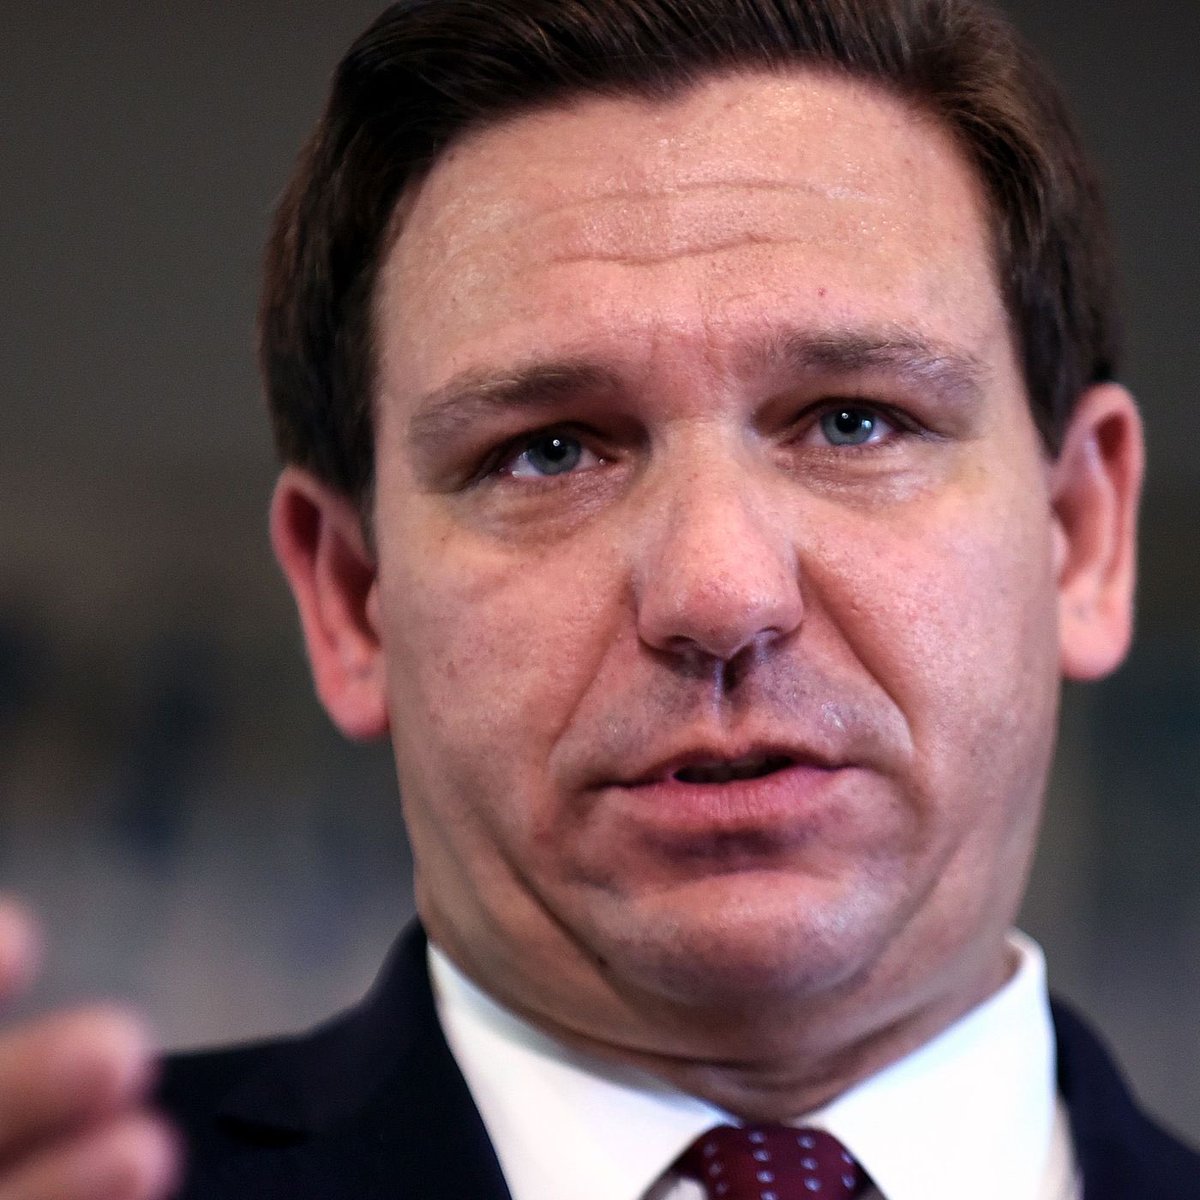 BREAKING: Ron DeSantis—who should be banned from the White House grounds—is announcing his bound to fail run for president tomorrow. DeSantis passed some of the most hateful, asinine and ignorant laws in the country, and he’s losing his battle with Mickey Mouse. DeSantis should